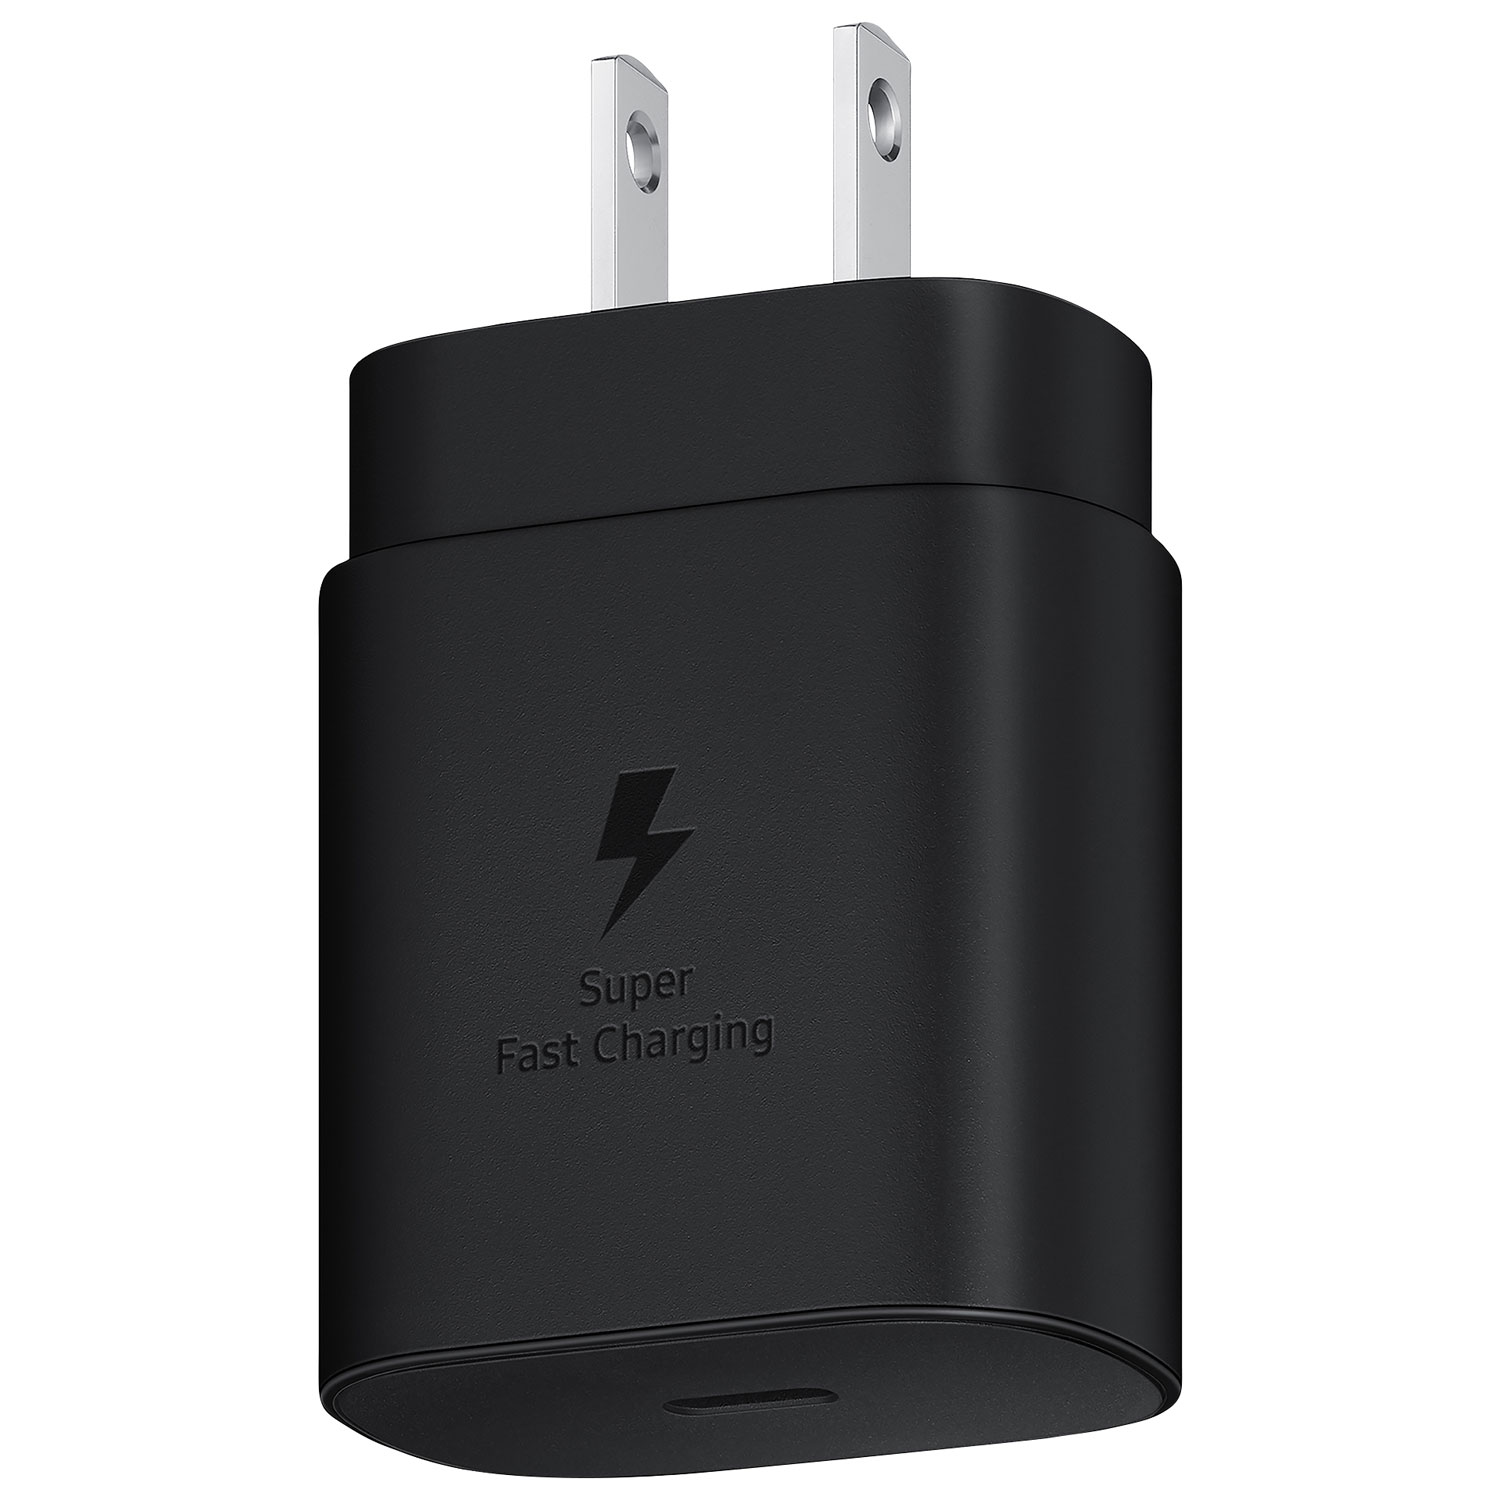 Samsung 25W Fast Charging Wall Charger - Black